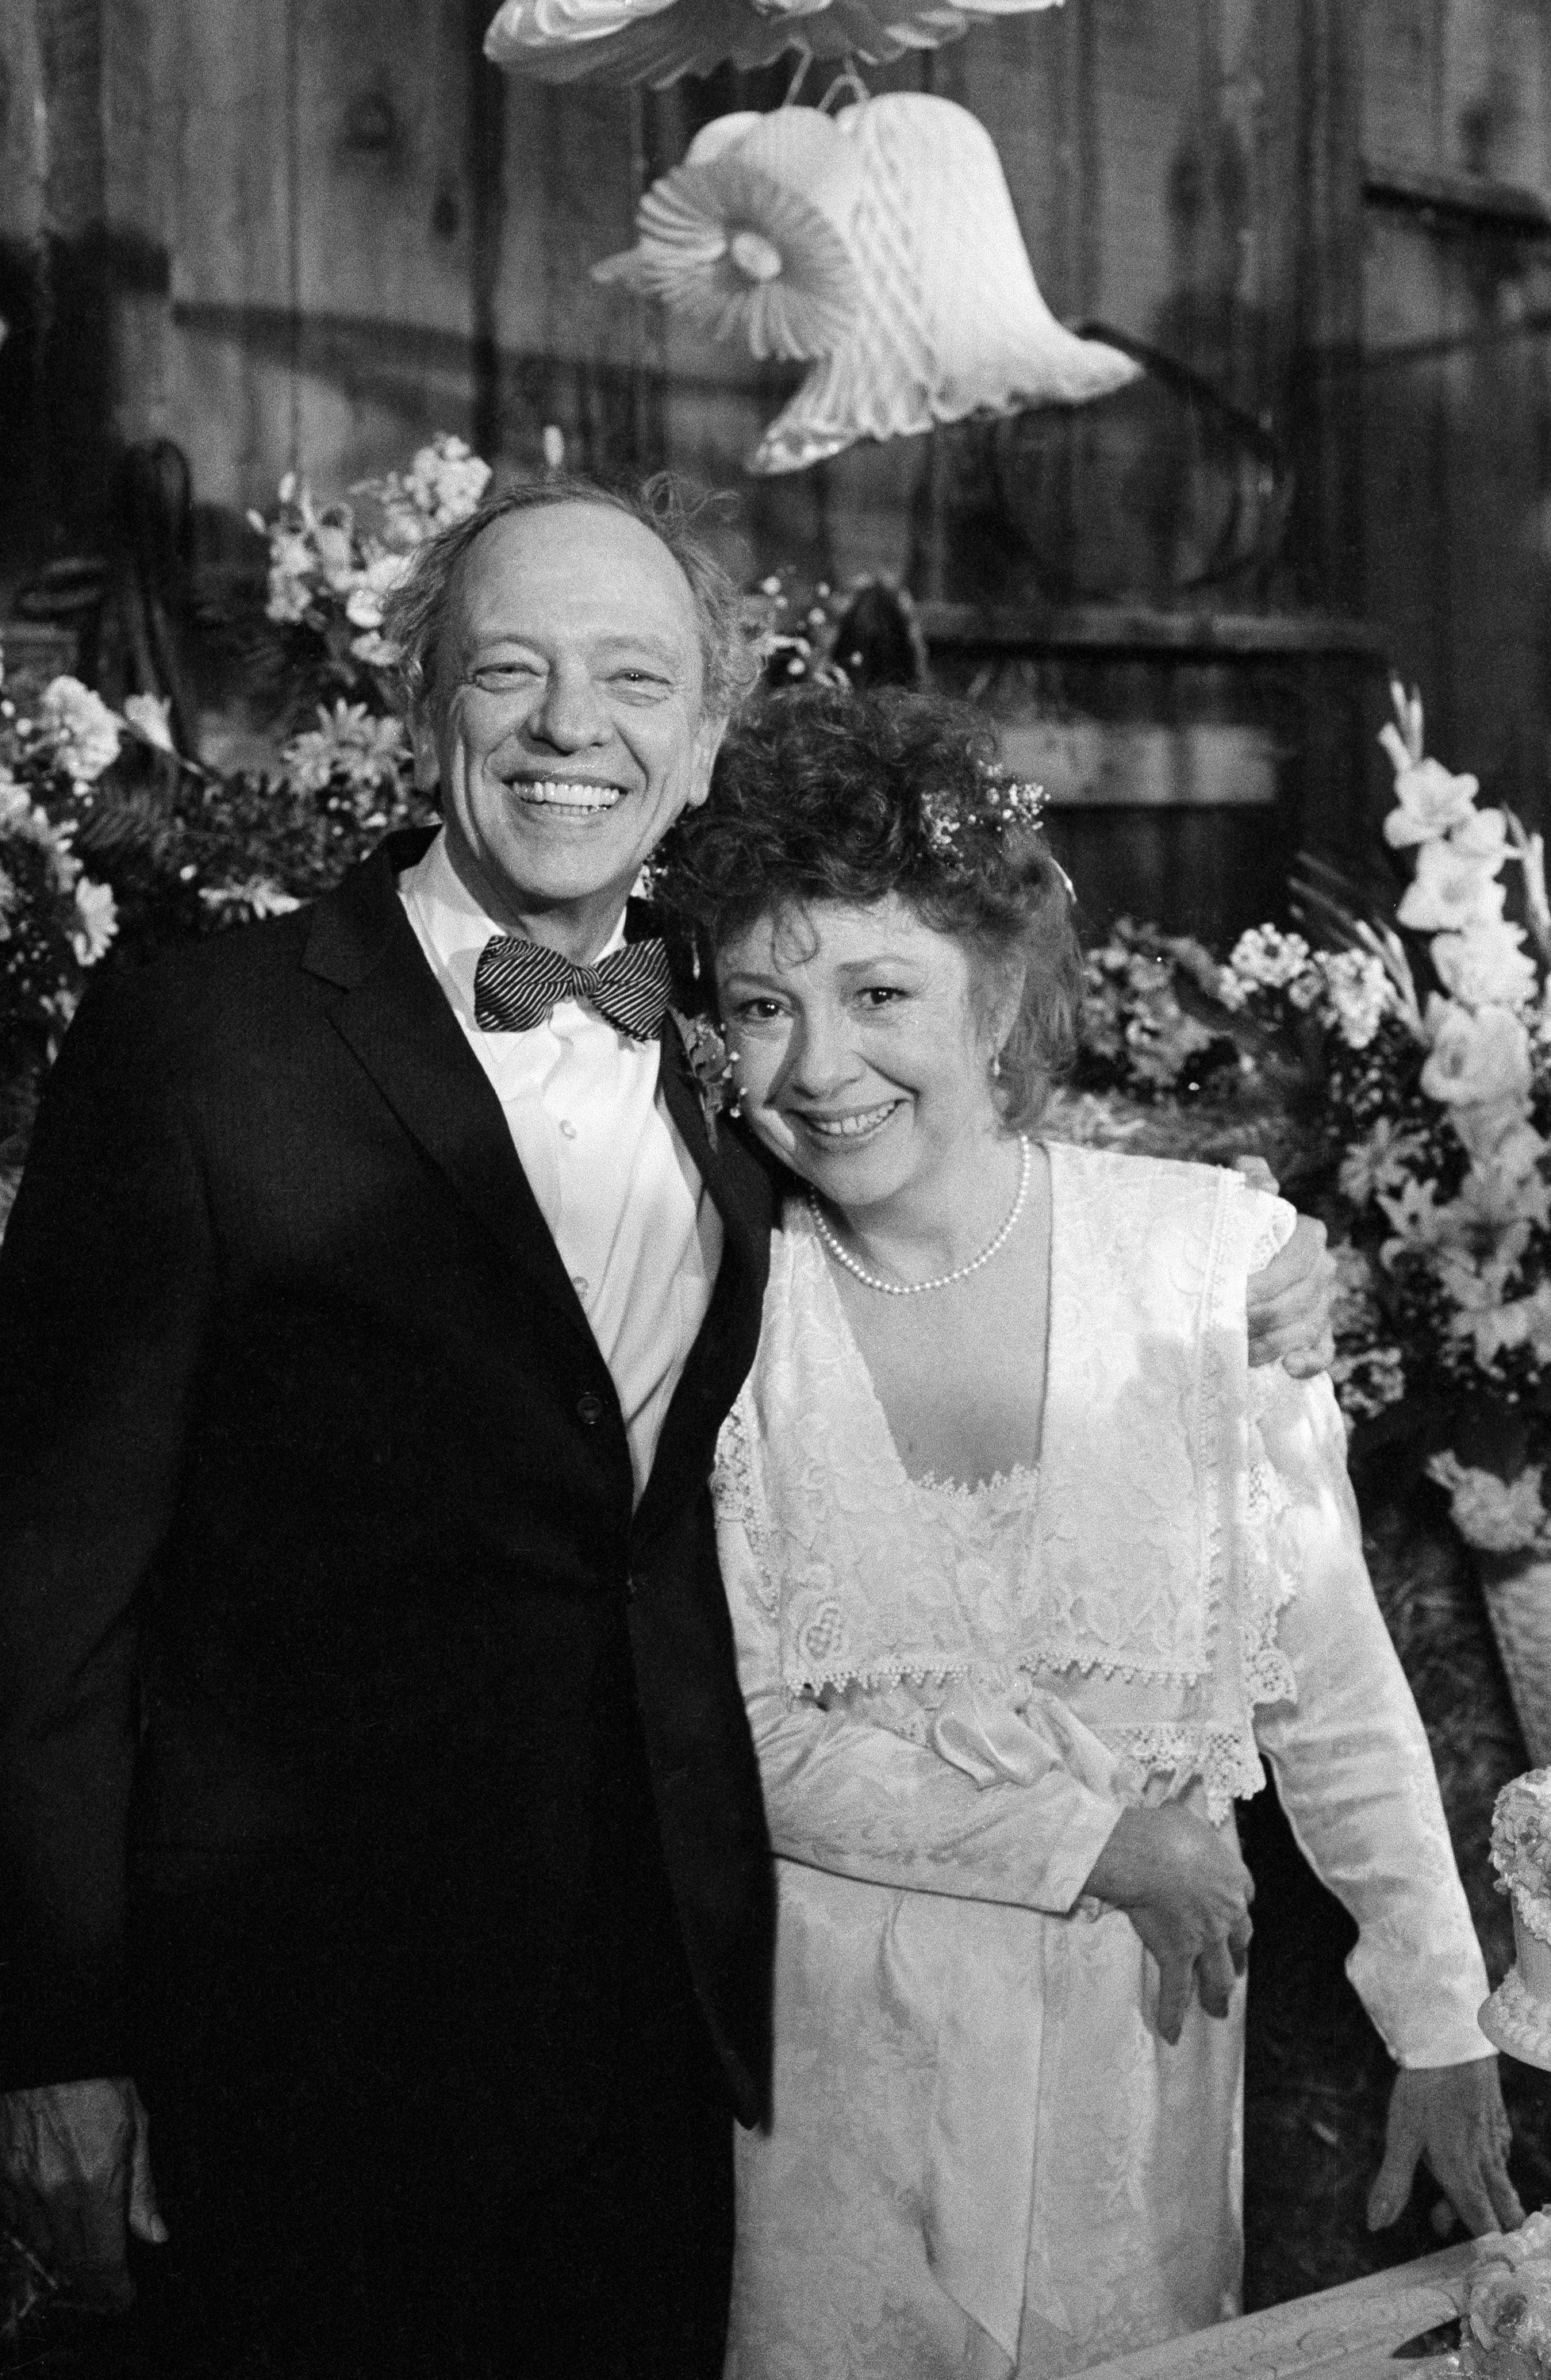 Don Knotts, left, as Barney Fife and Betty Lynn as his bride Thelma Lou in a scene from 'Return to Mayberry,' 